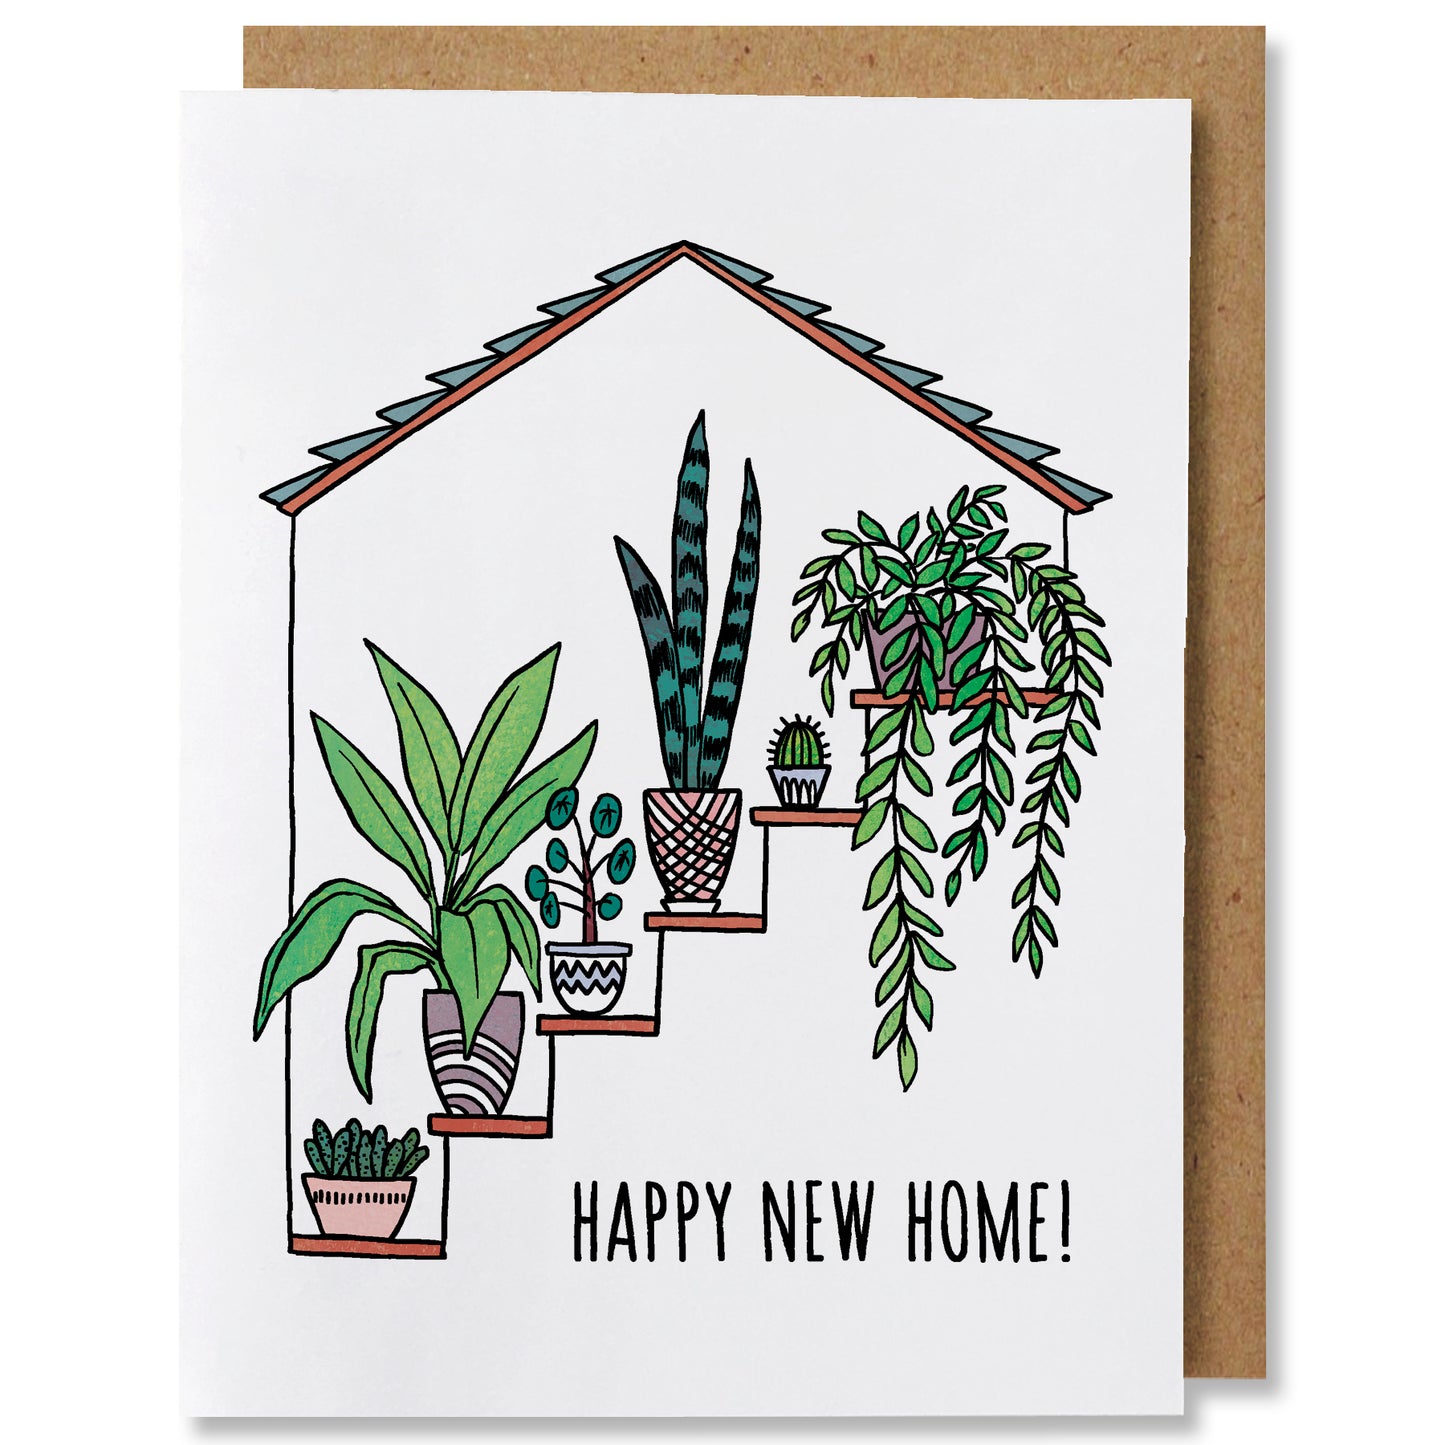 An illustrated greeting card featuring a different variety of potted plants on each level of a staircase outside of a home with the caption "happy new home!"